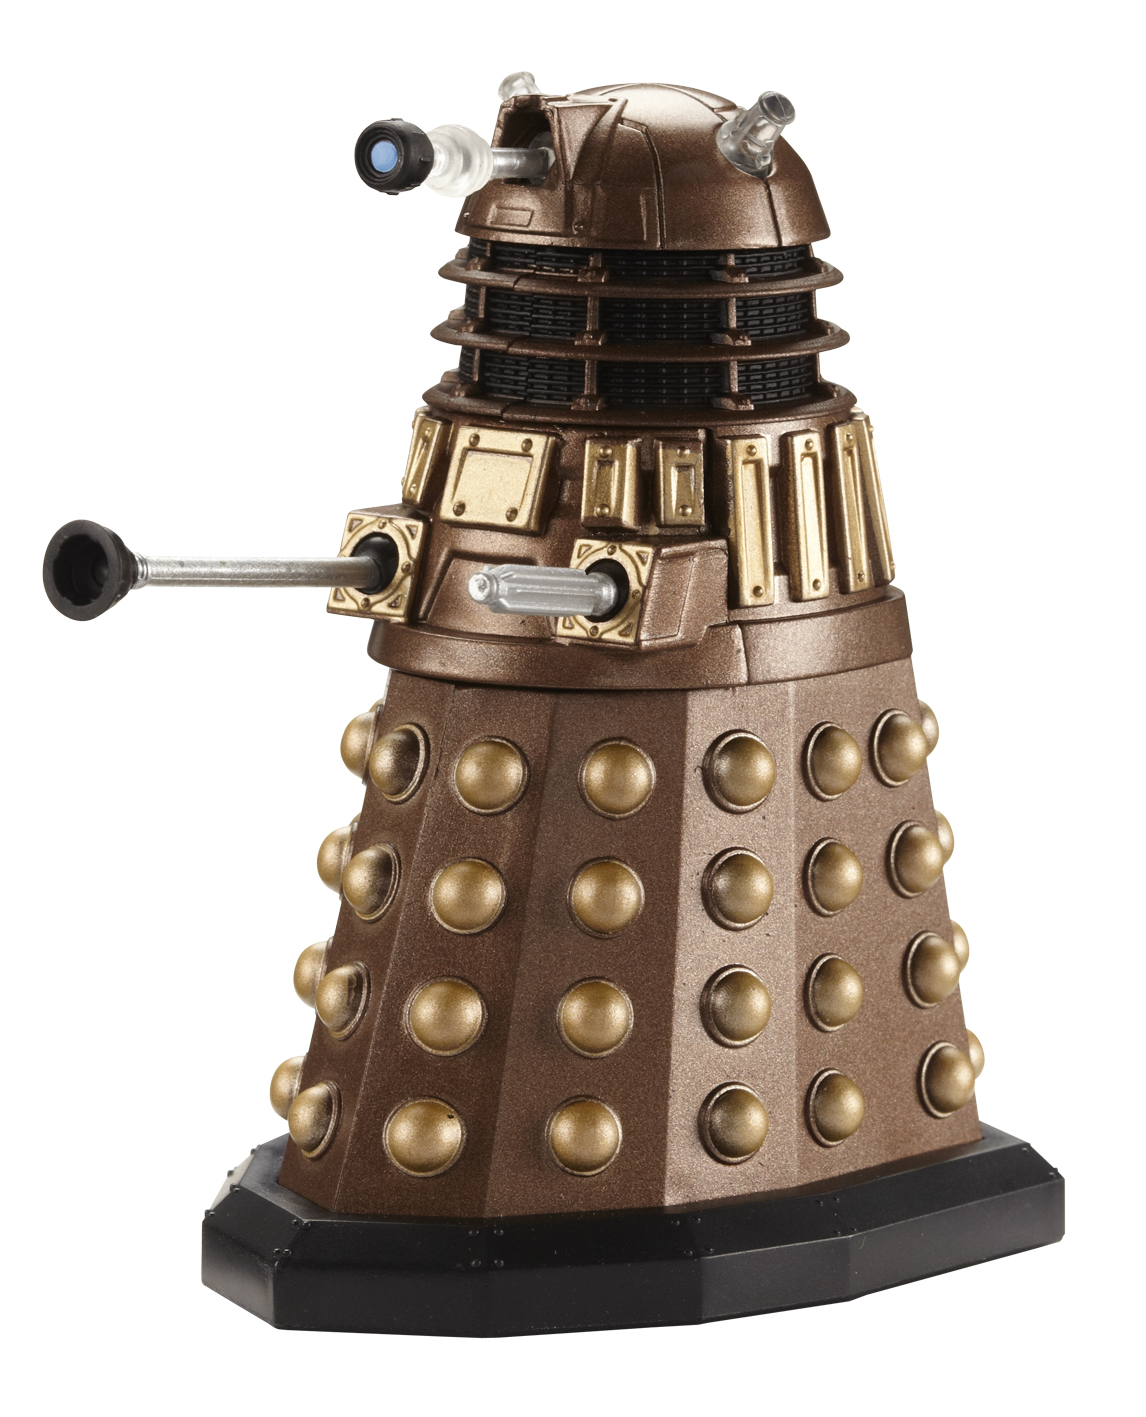 Doctor who  Bronze colour  Dalek soft toy  figure with lights and sounds